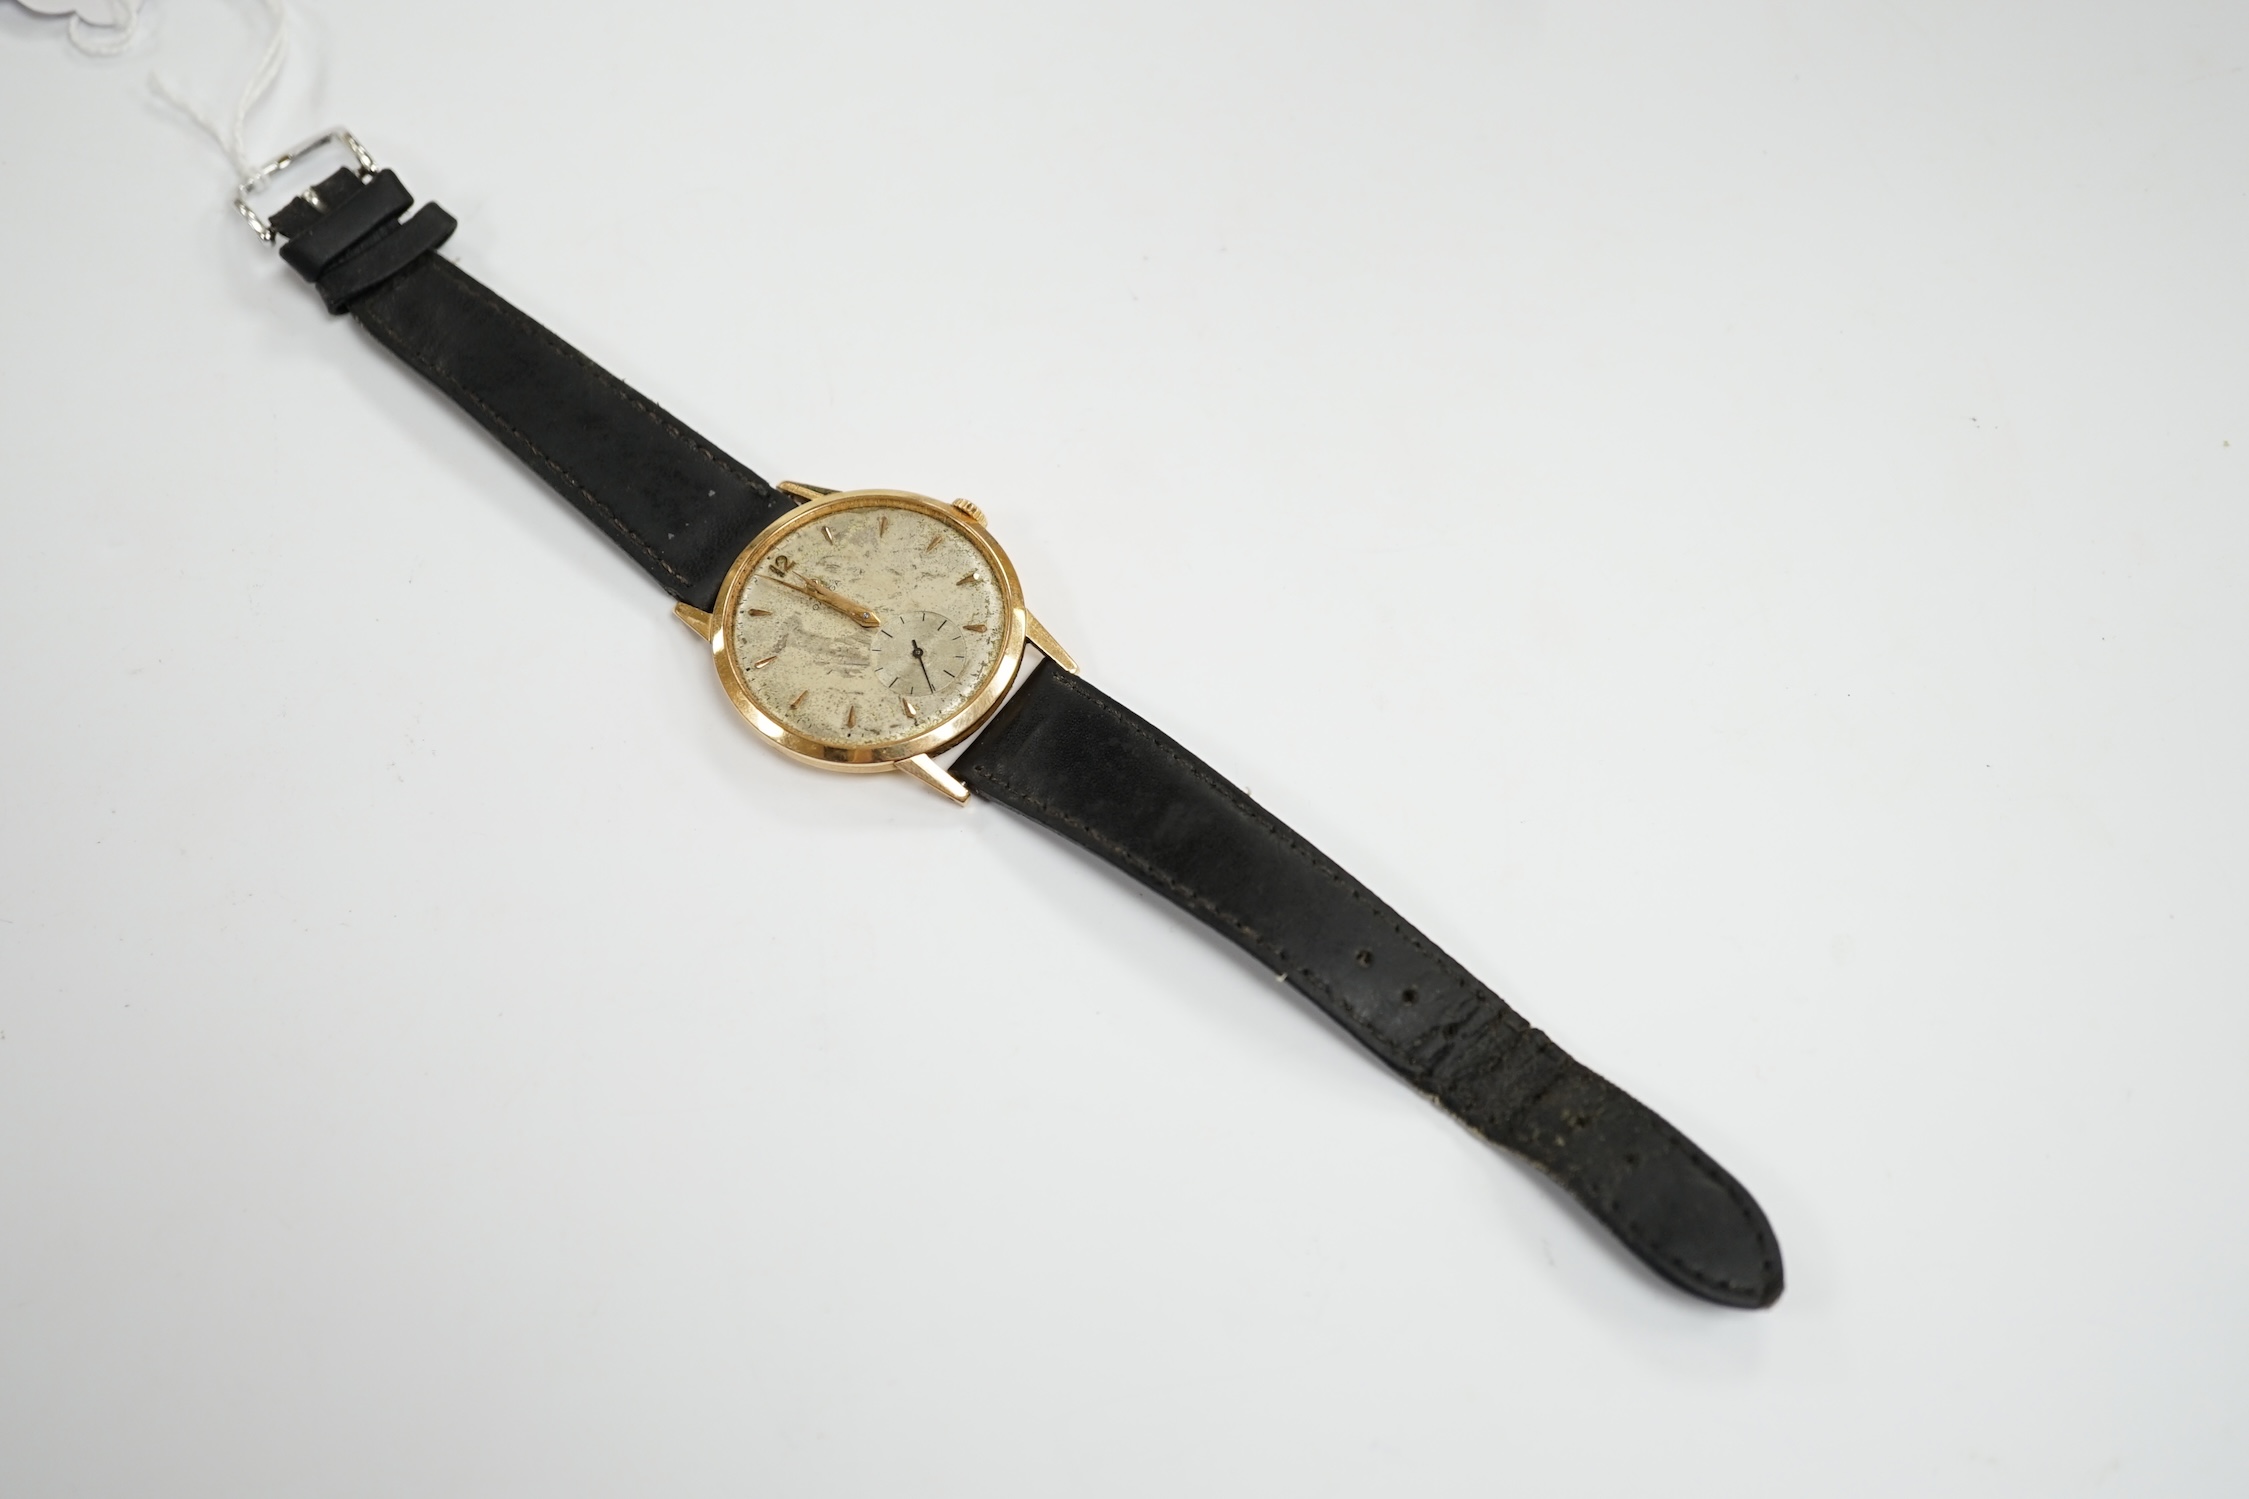 A gentleman's 18k Omega manual wind wrist watch, on a later associated leather strap, case diameter 37mm. (a.f.)